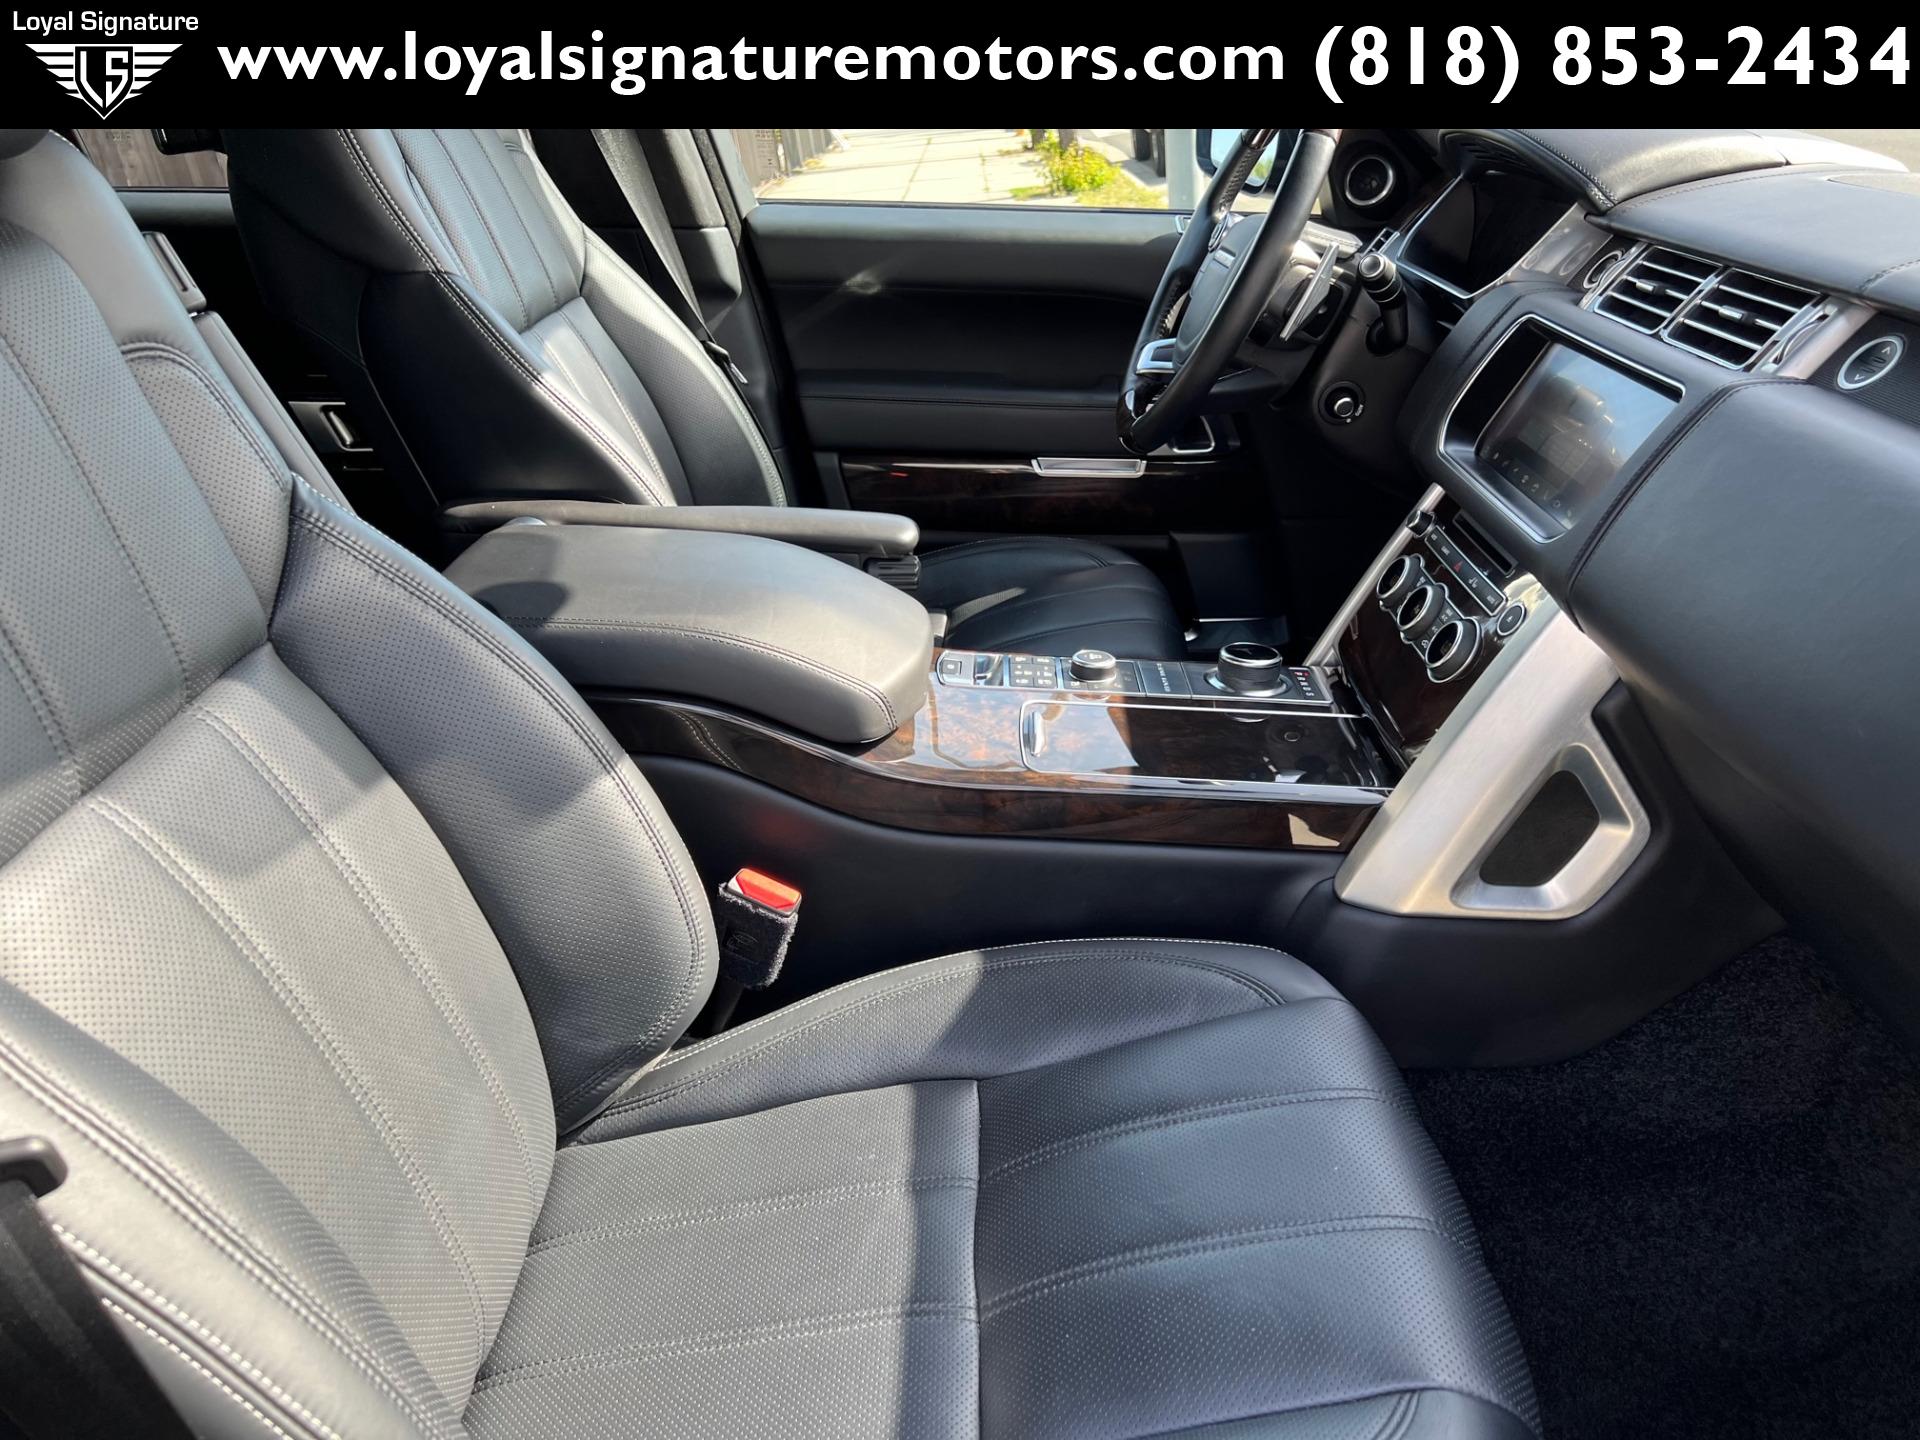 Used-2017-Land-Rover-Range-Rover-Autobiography